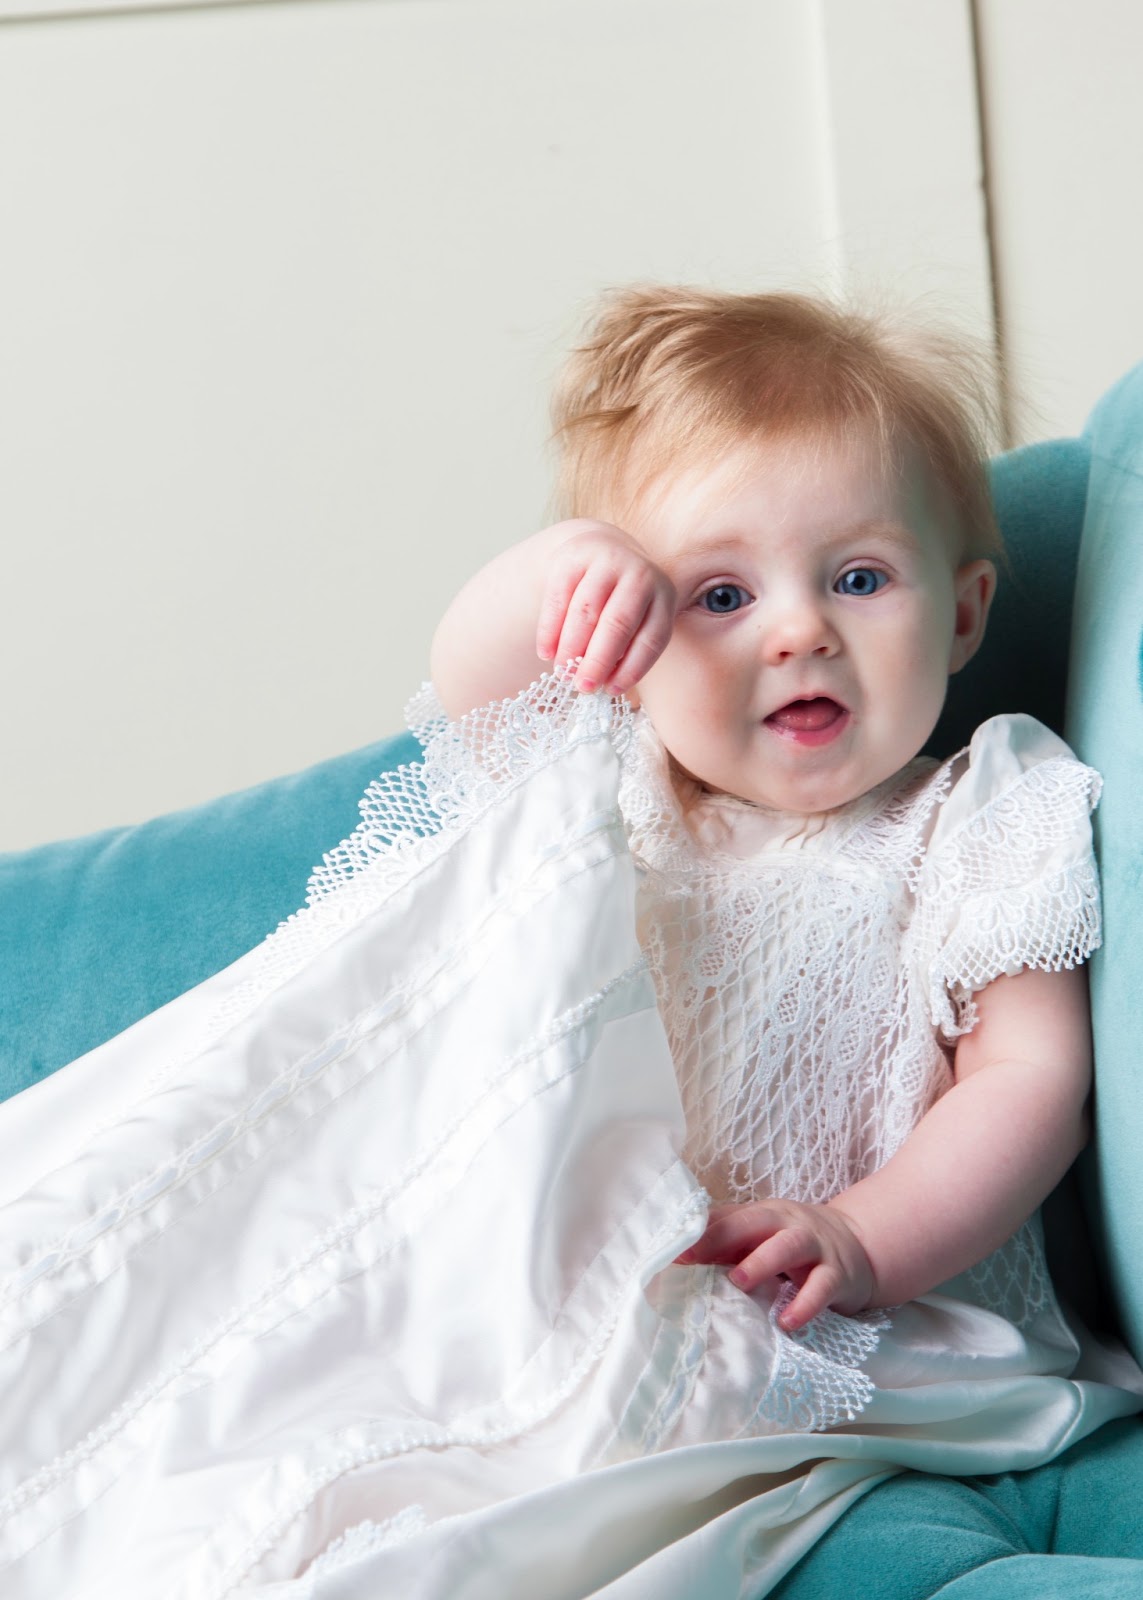 THE CRAFT SHARE: Six Month Old Photography Tips